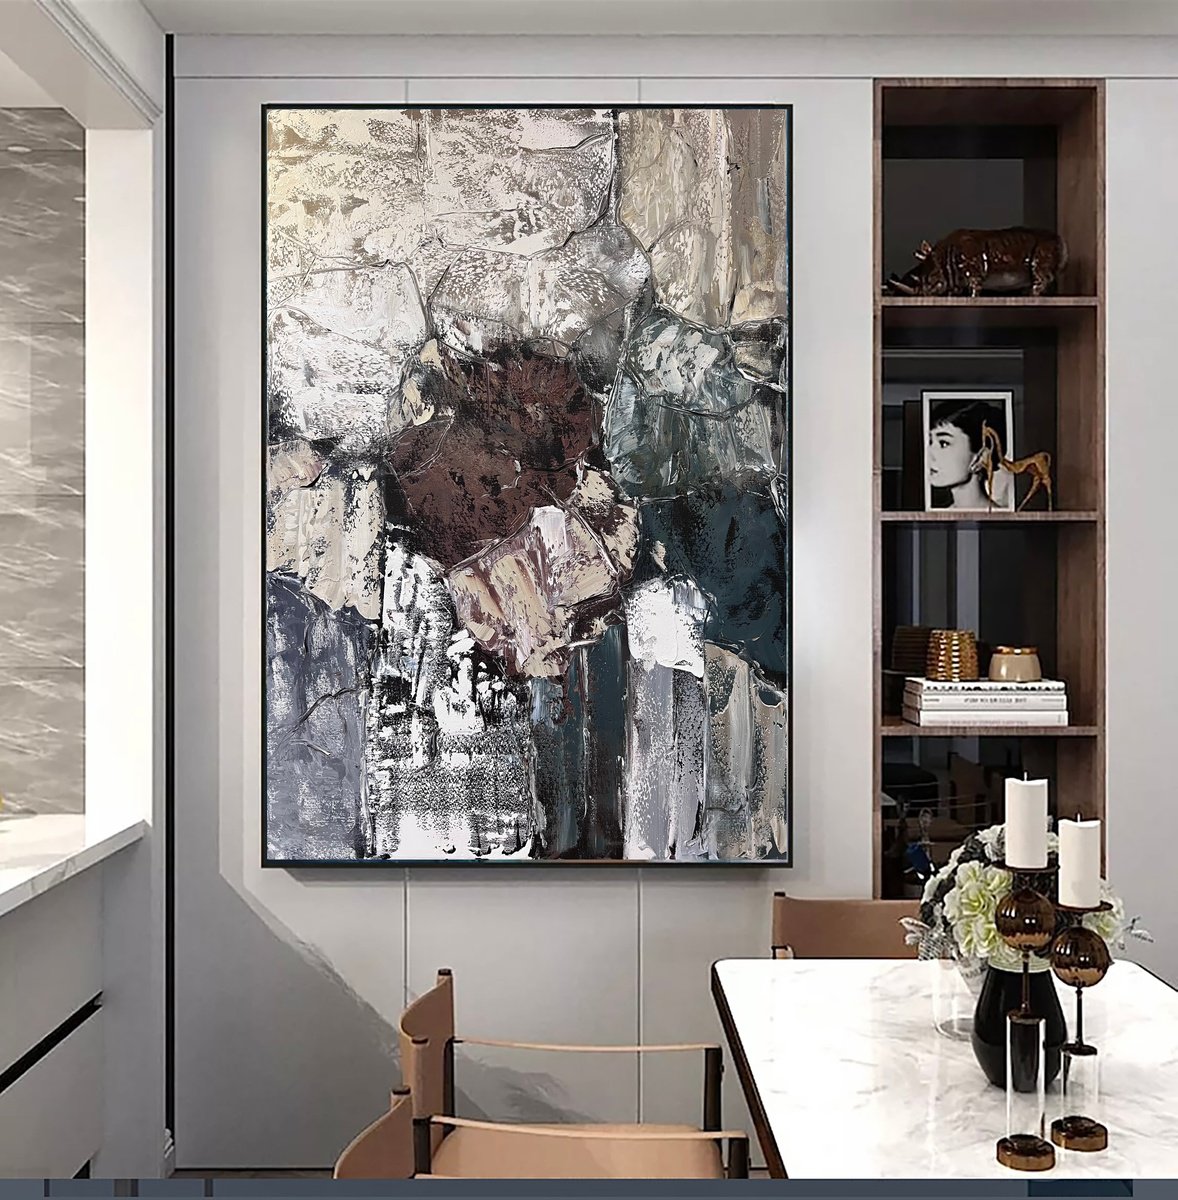 Brown Beige abstract Art. POWER OF THE STONE-2 by Marina Skromova